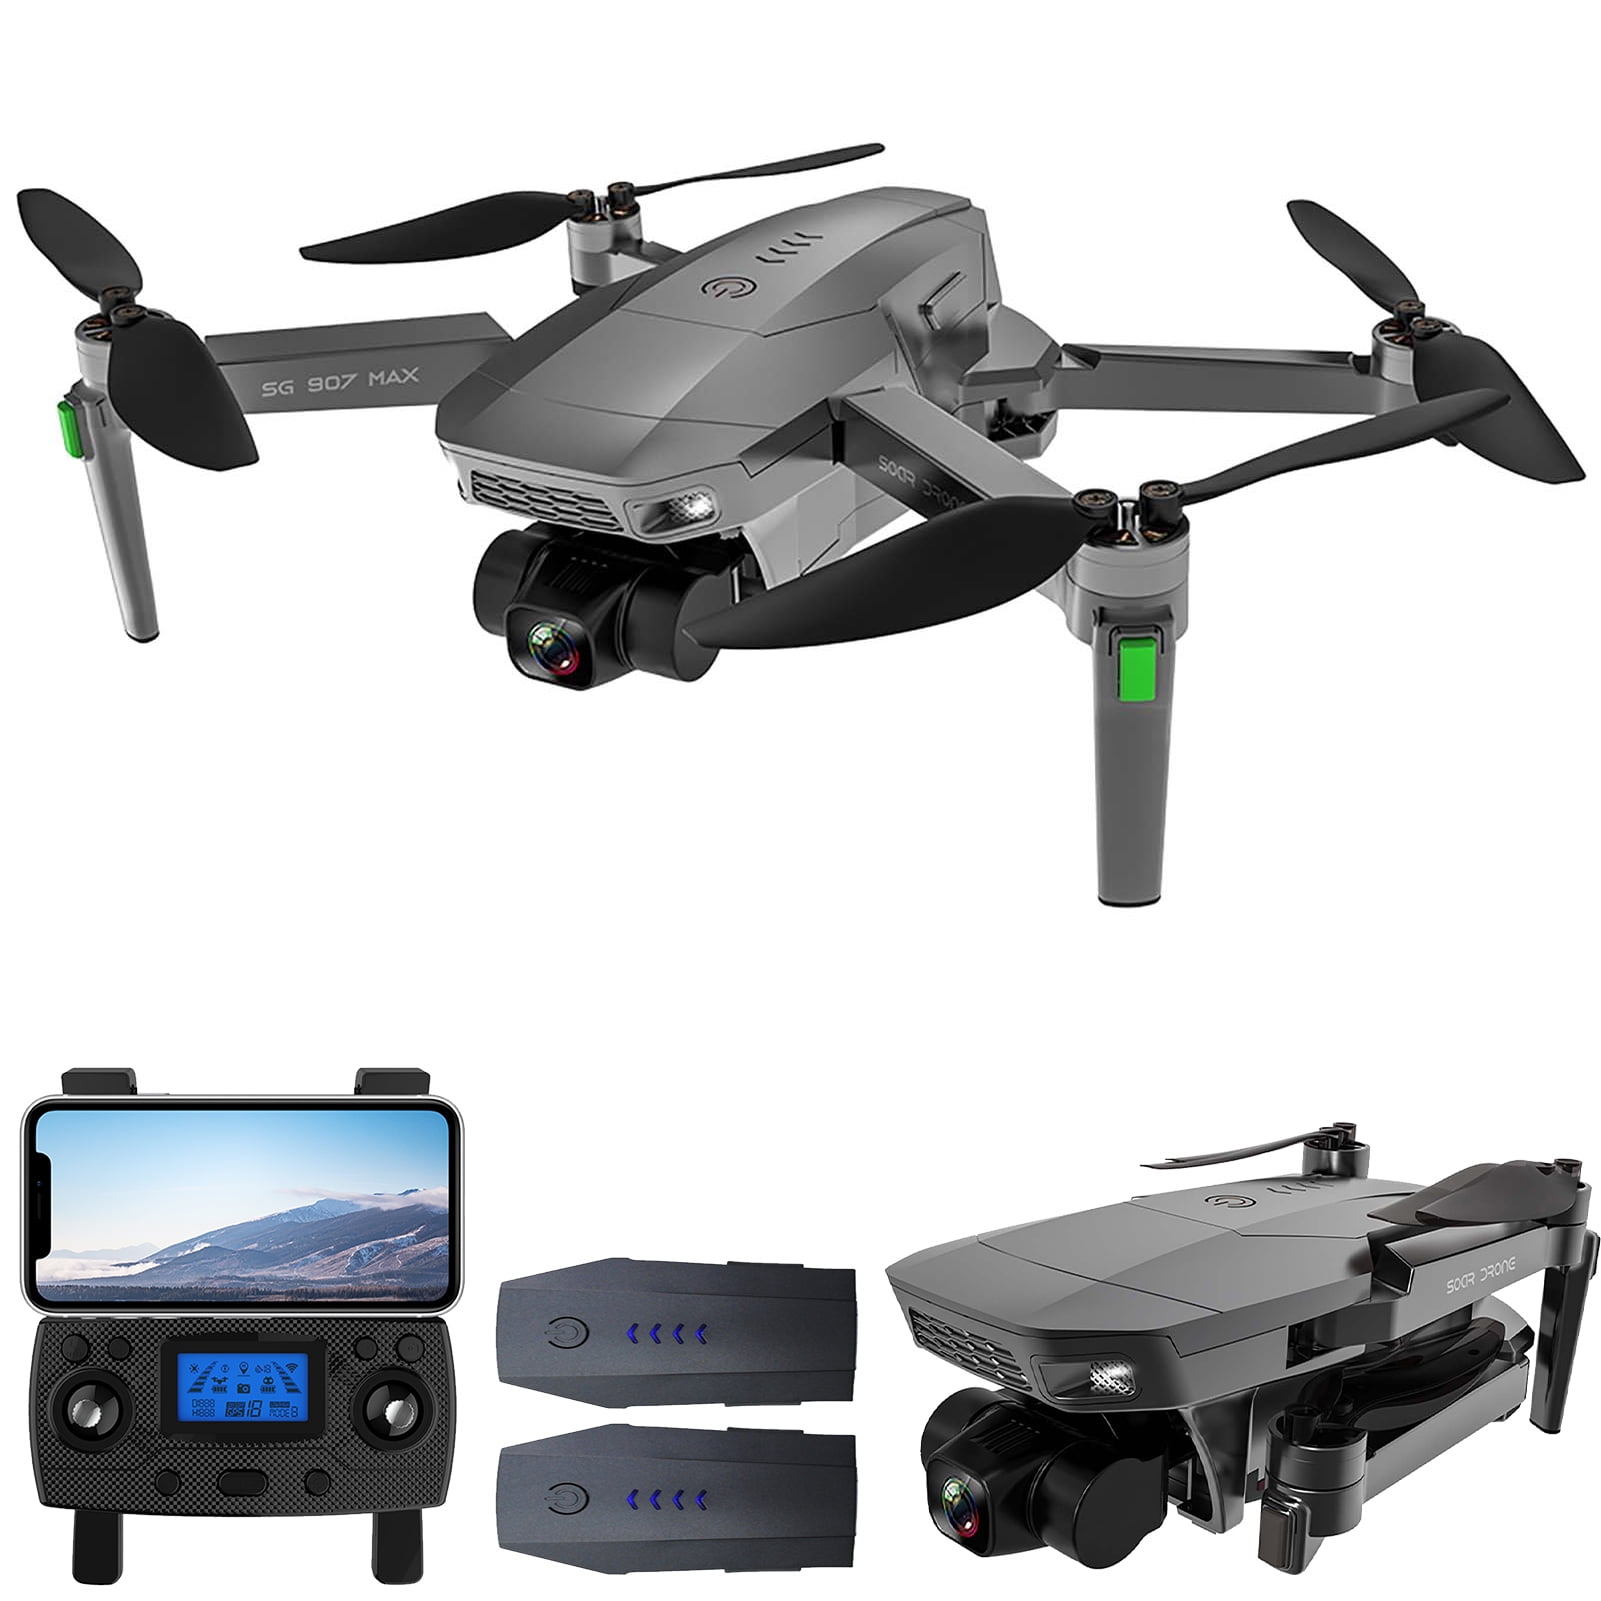 Details about   Quadcopter Drone With 4k Camera Wifi Fpv Dual Lens Wifi App Control Foldable 